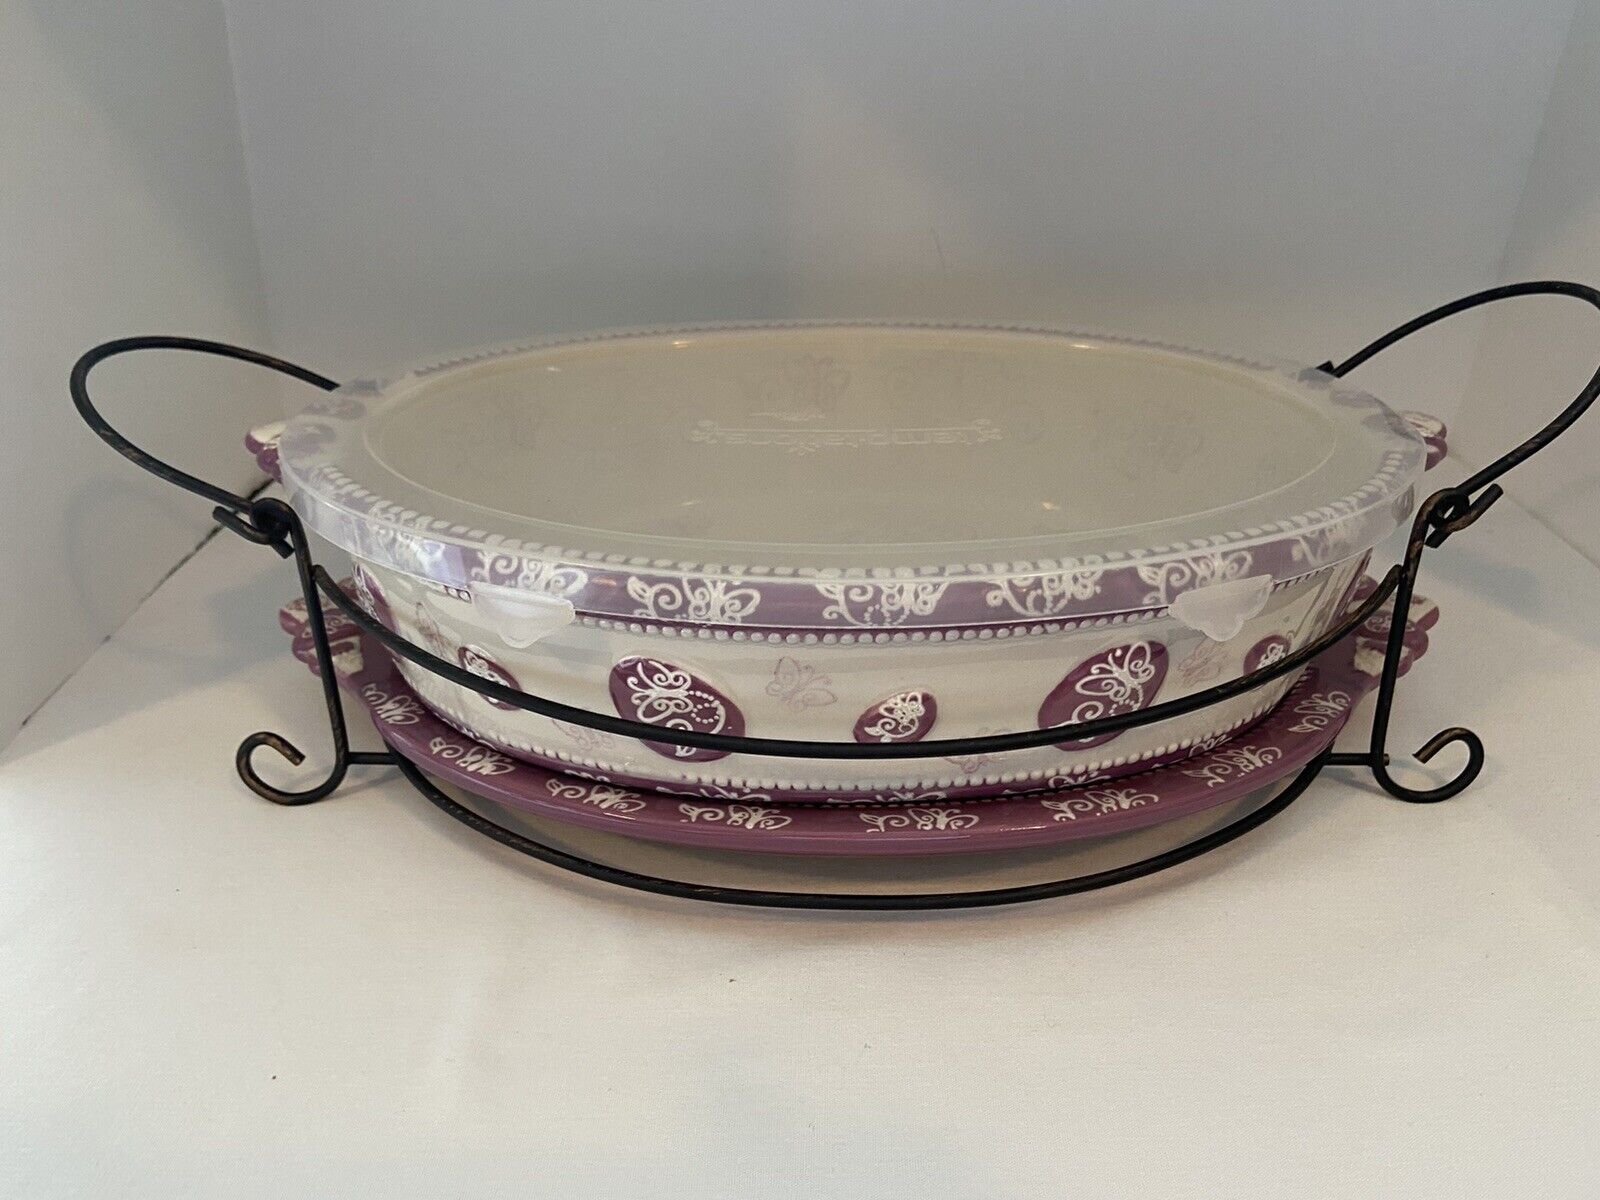 NEW Temptations By Tara Butterfly Lace Purple & Ivory Serving Tray Platter 4 Pcs